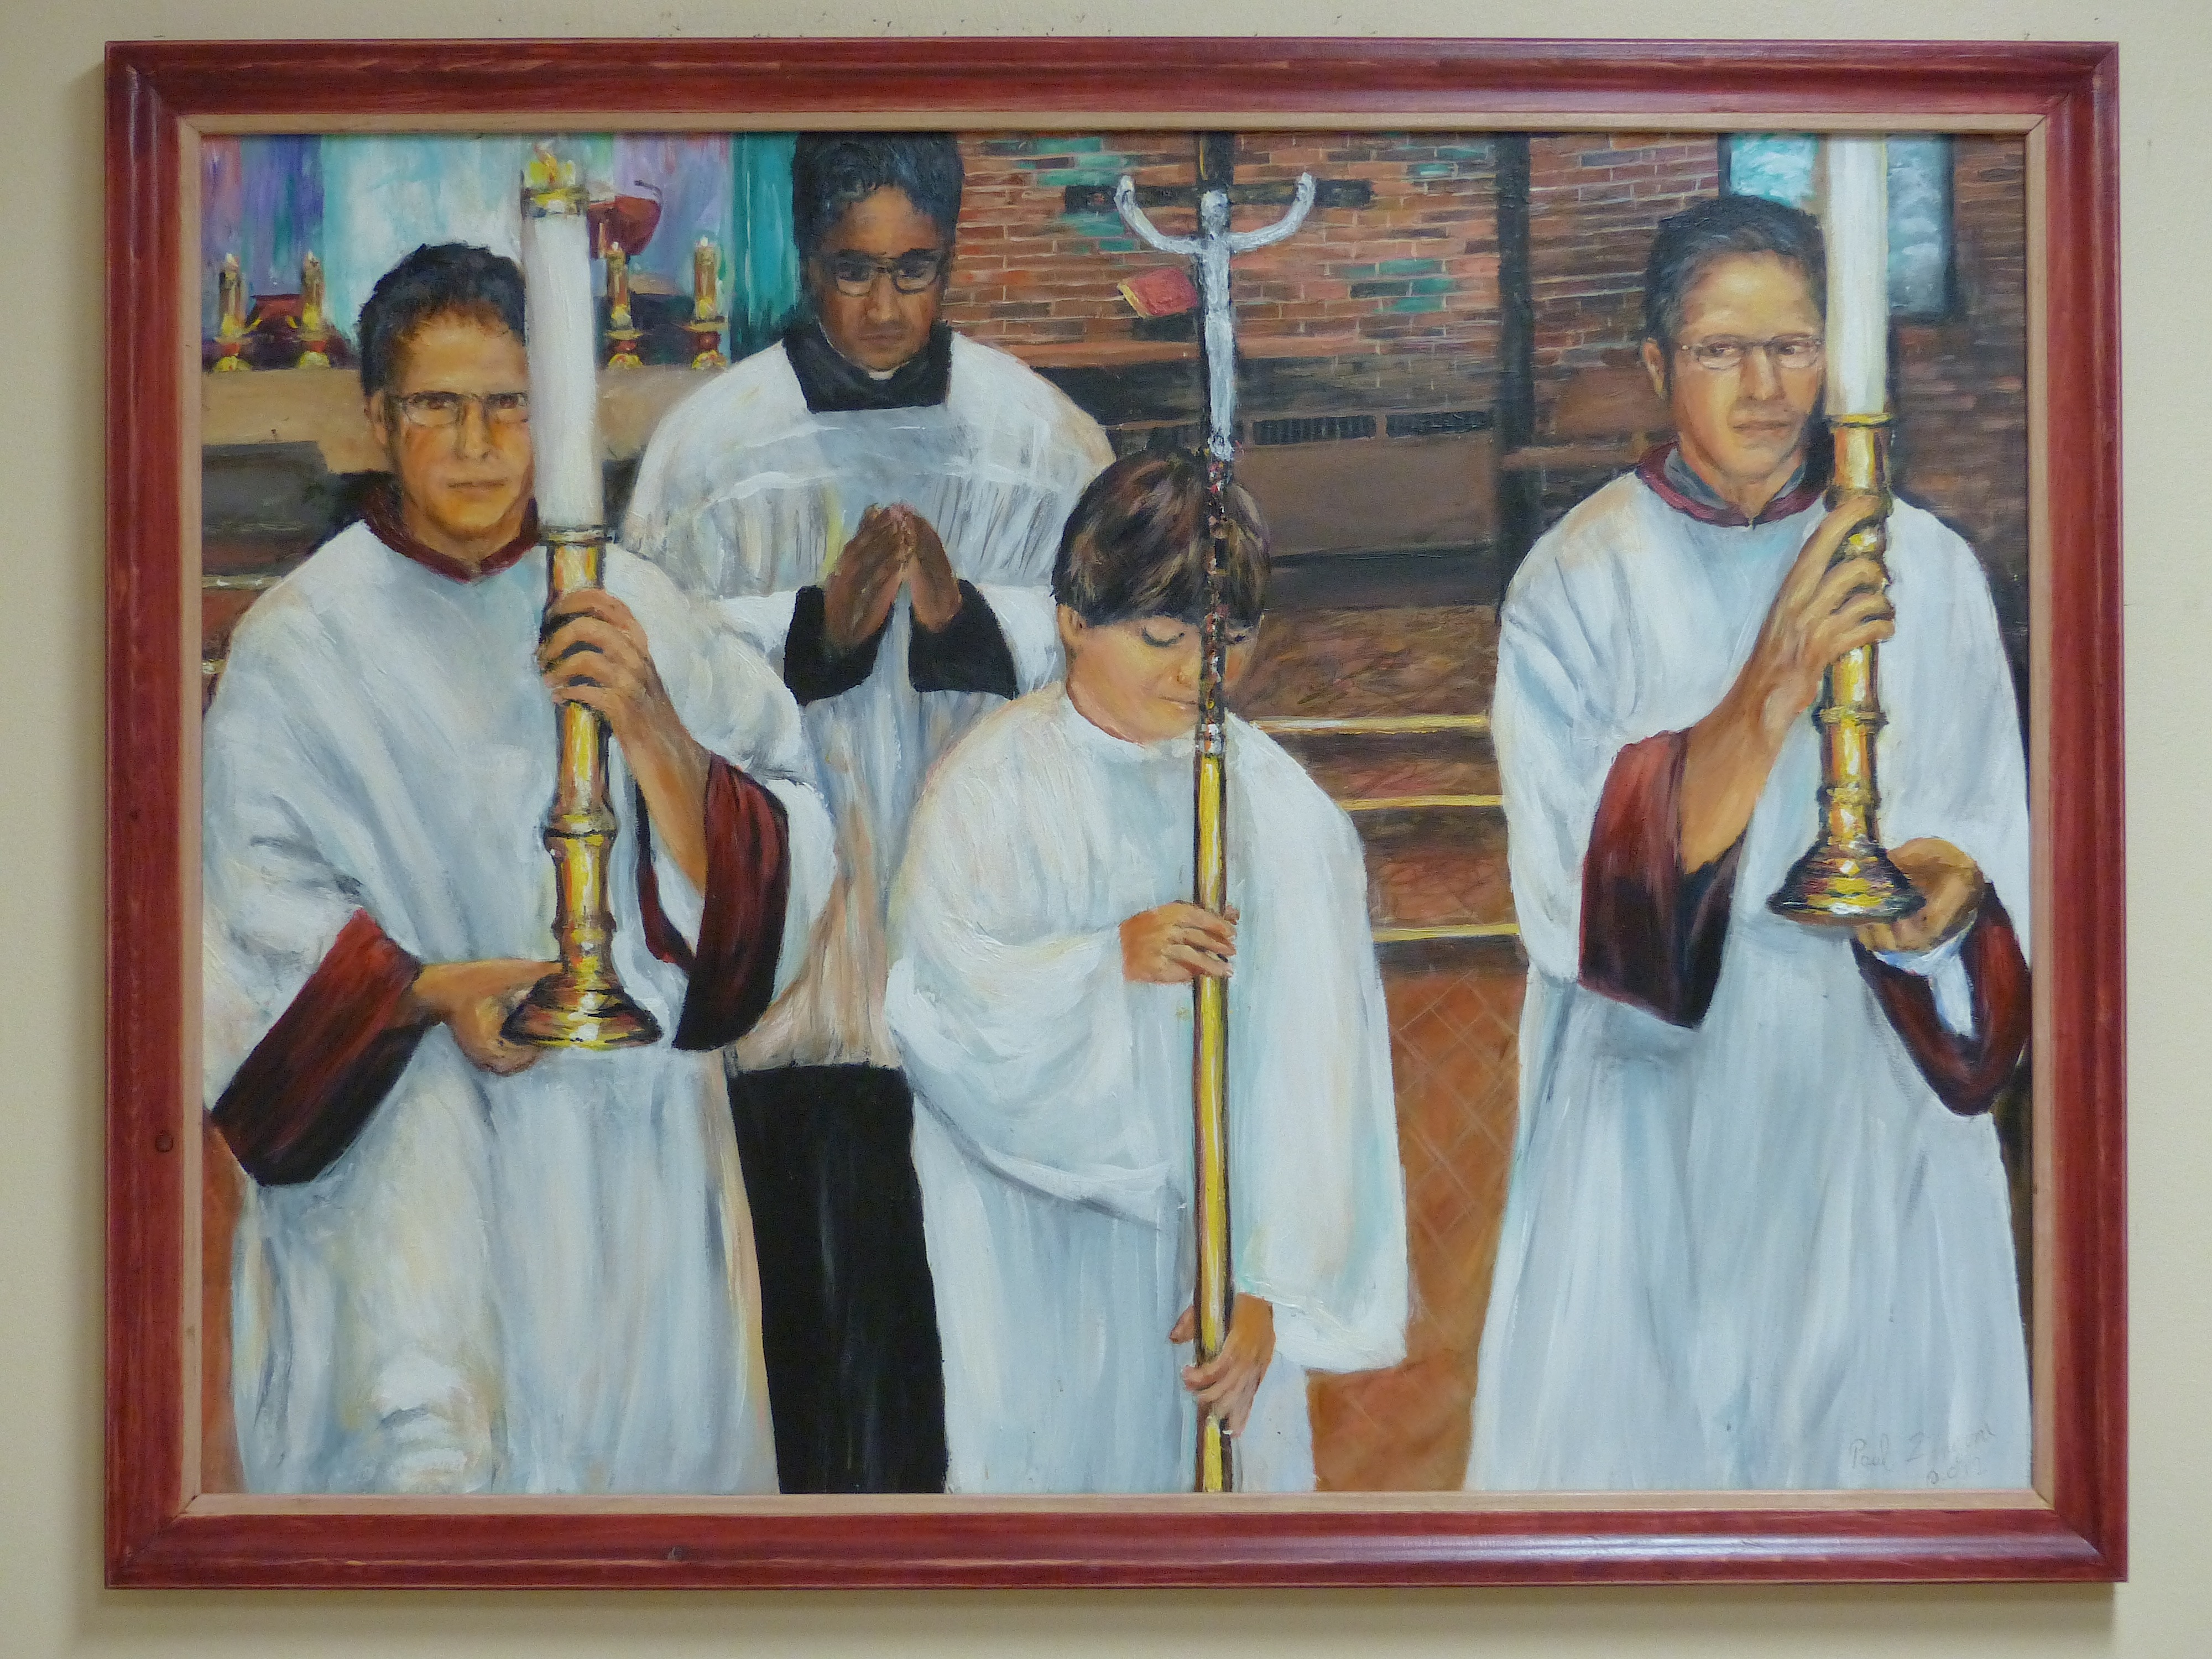 Zingone Brothers and Altar Servers Procession - Painting and Framing by Zingone Brothers